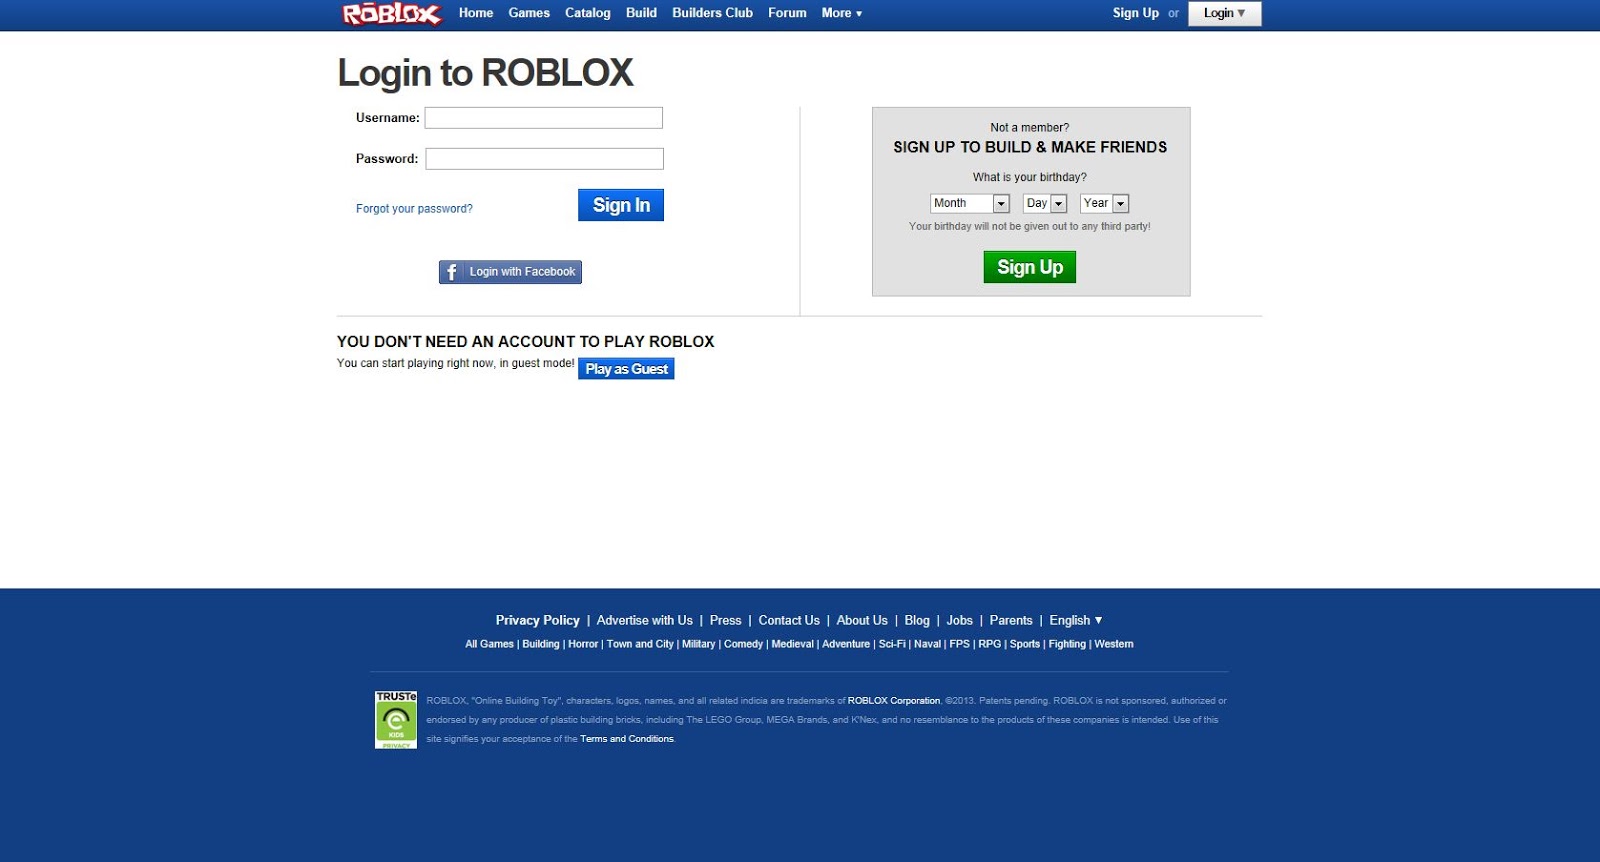 Unofficial Roblox Roblox Blue Panel Update On Website - august 2013 roblox news